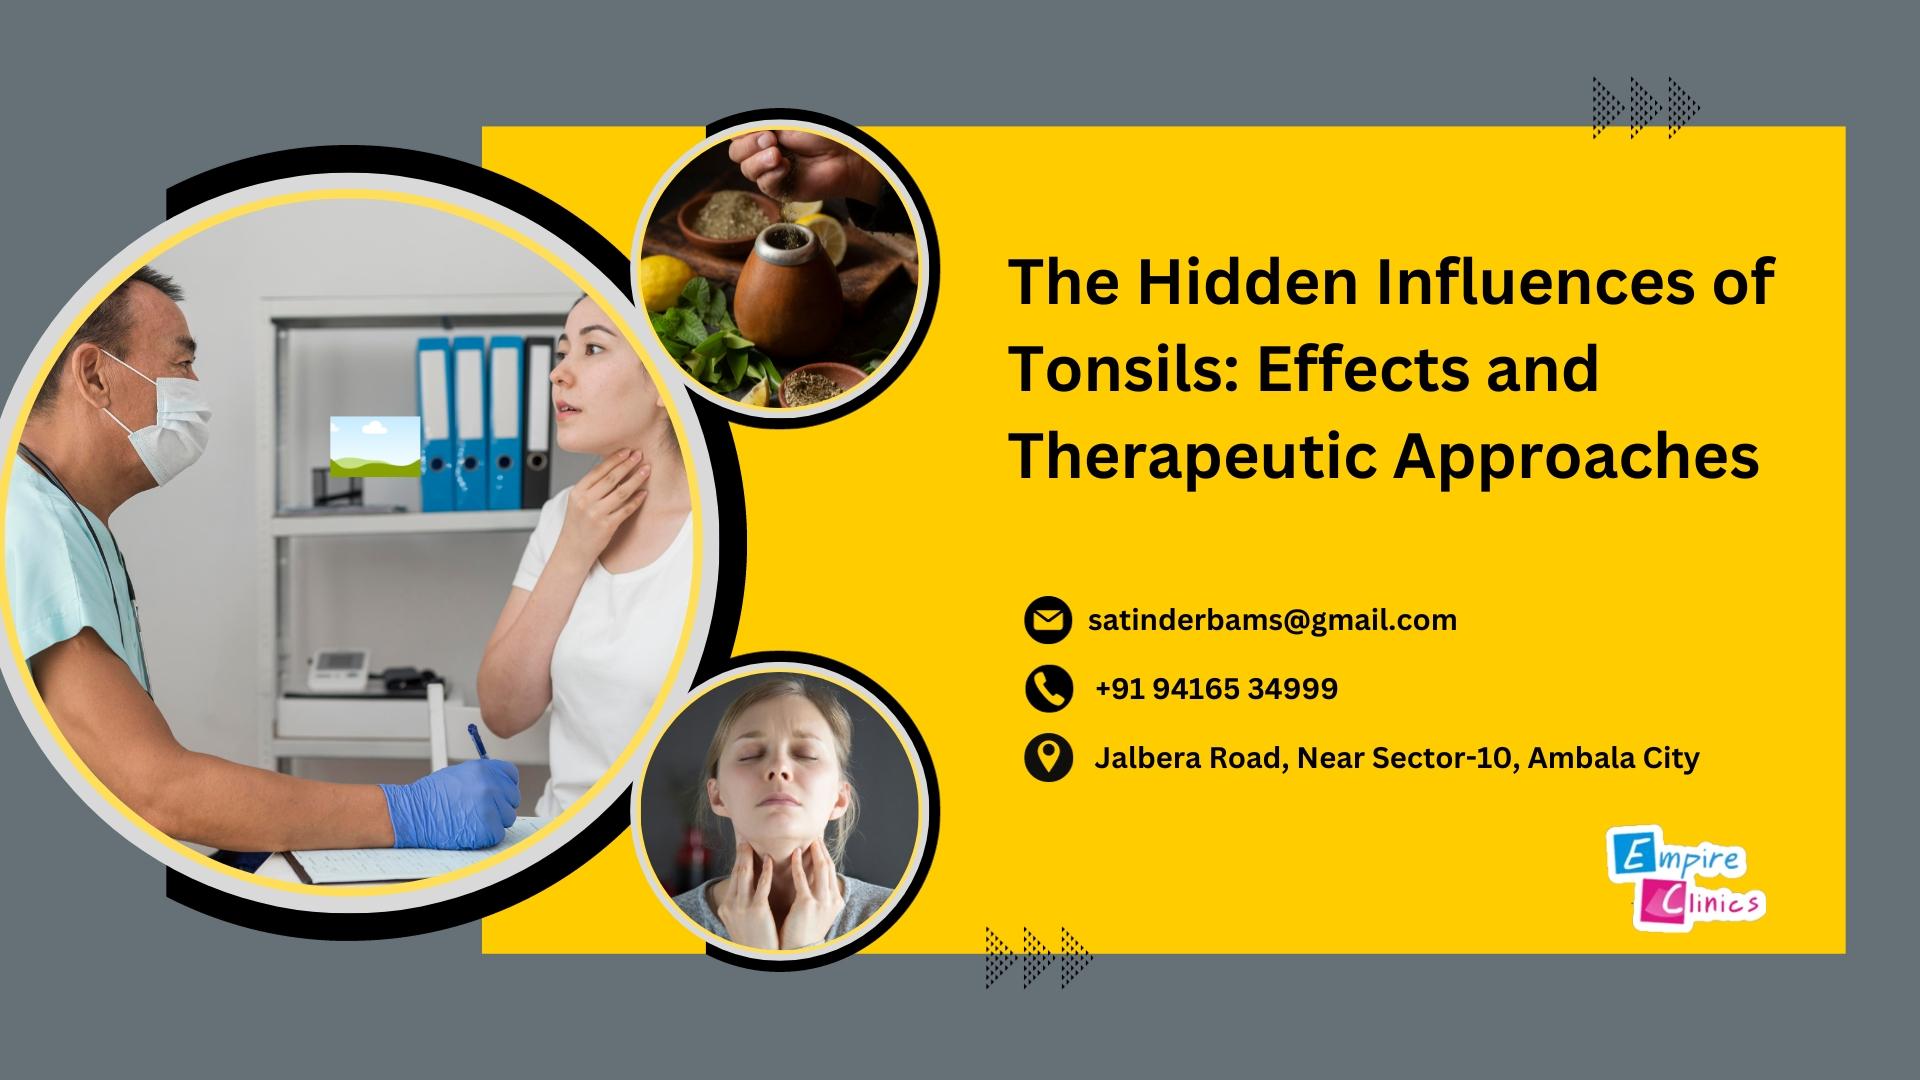 The Hidden Influences of Tonsils: Effects and Therapeutic Approaches